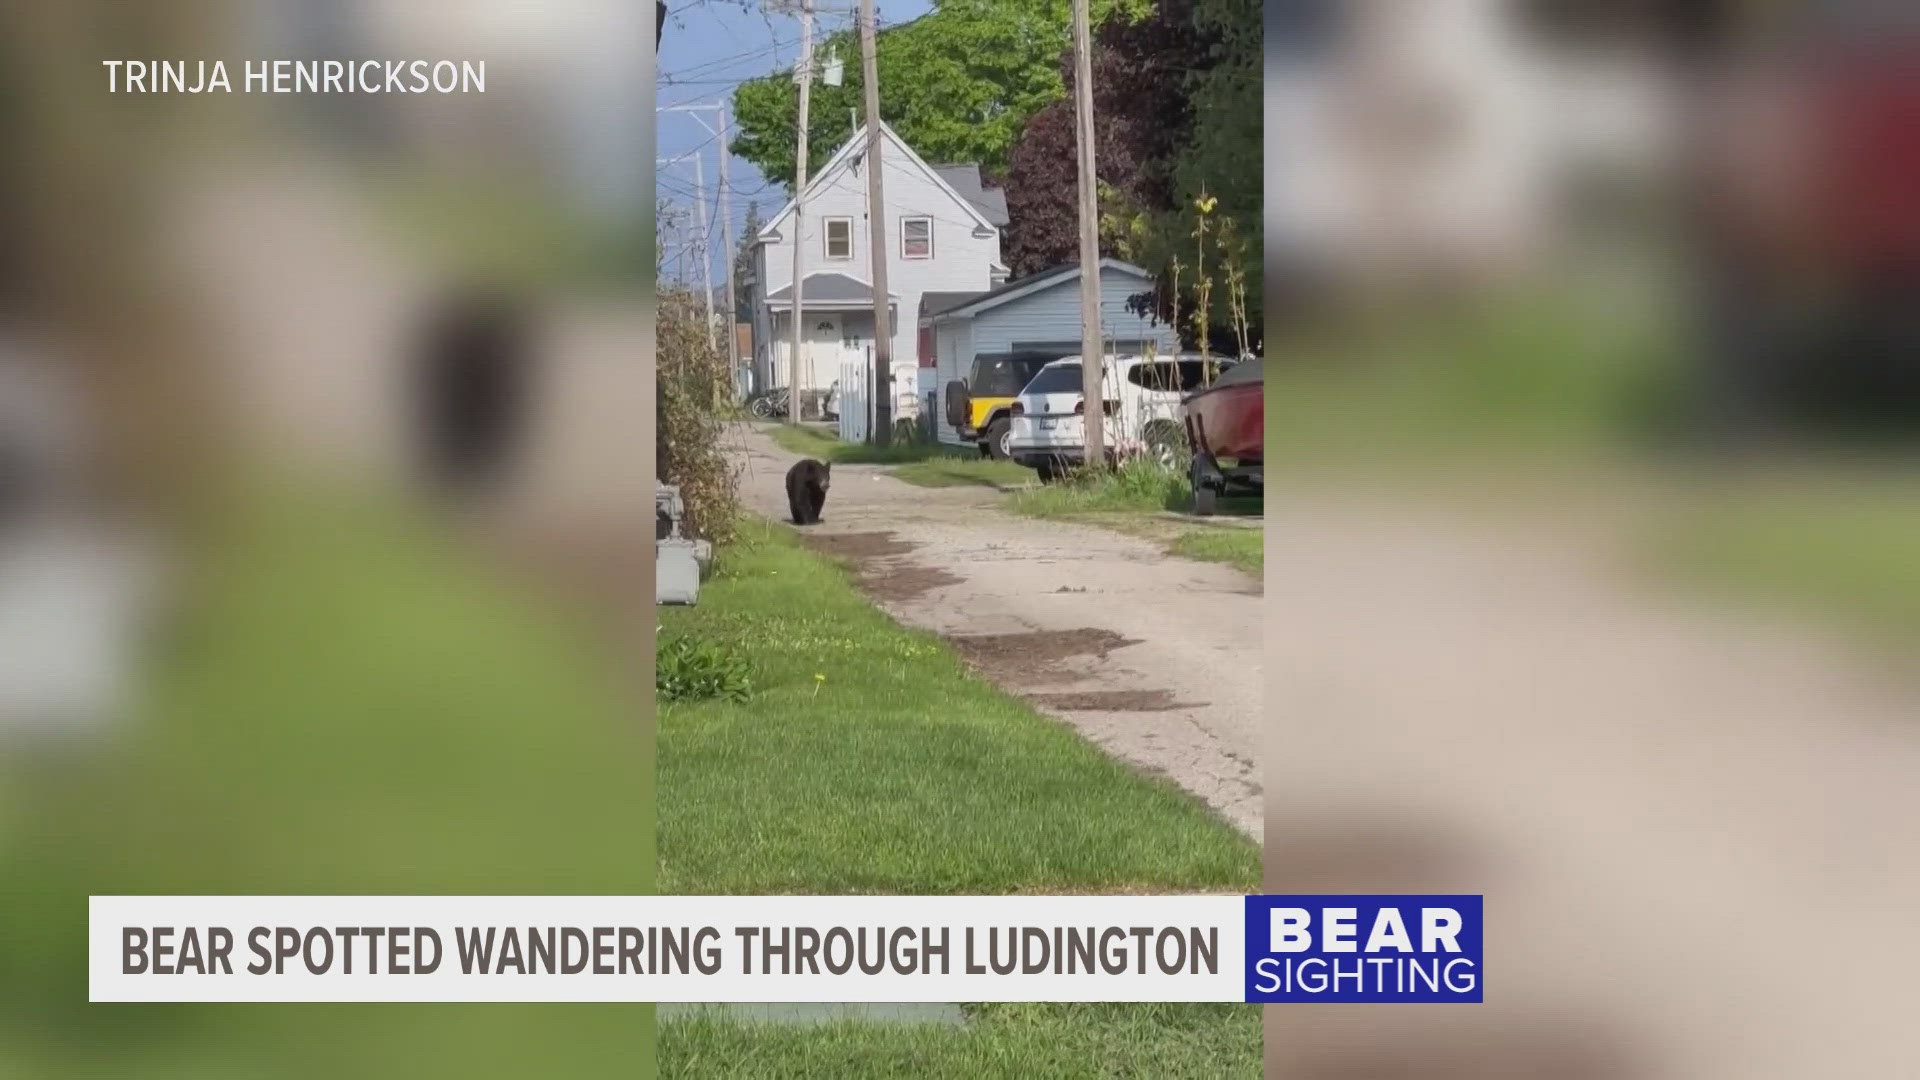 After the bear safely made it home, officials say people should stay out of the way and keep their distance from a bear spotted in an urban setting.